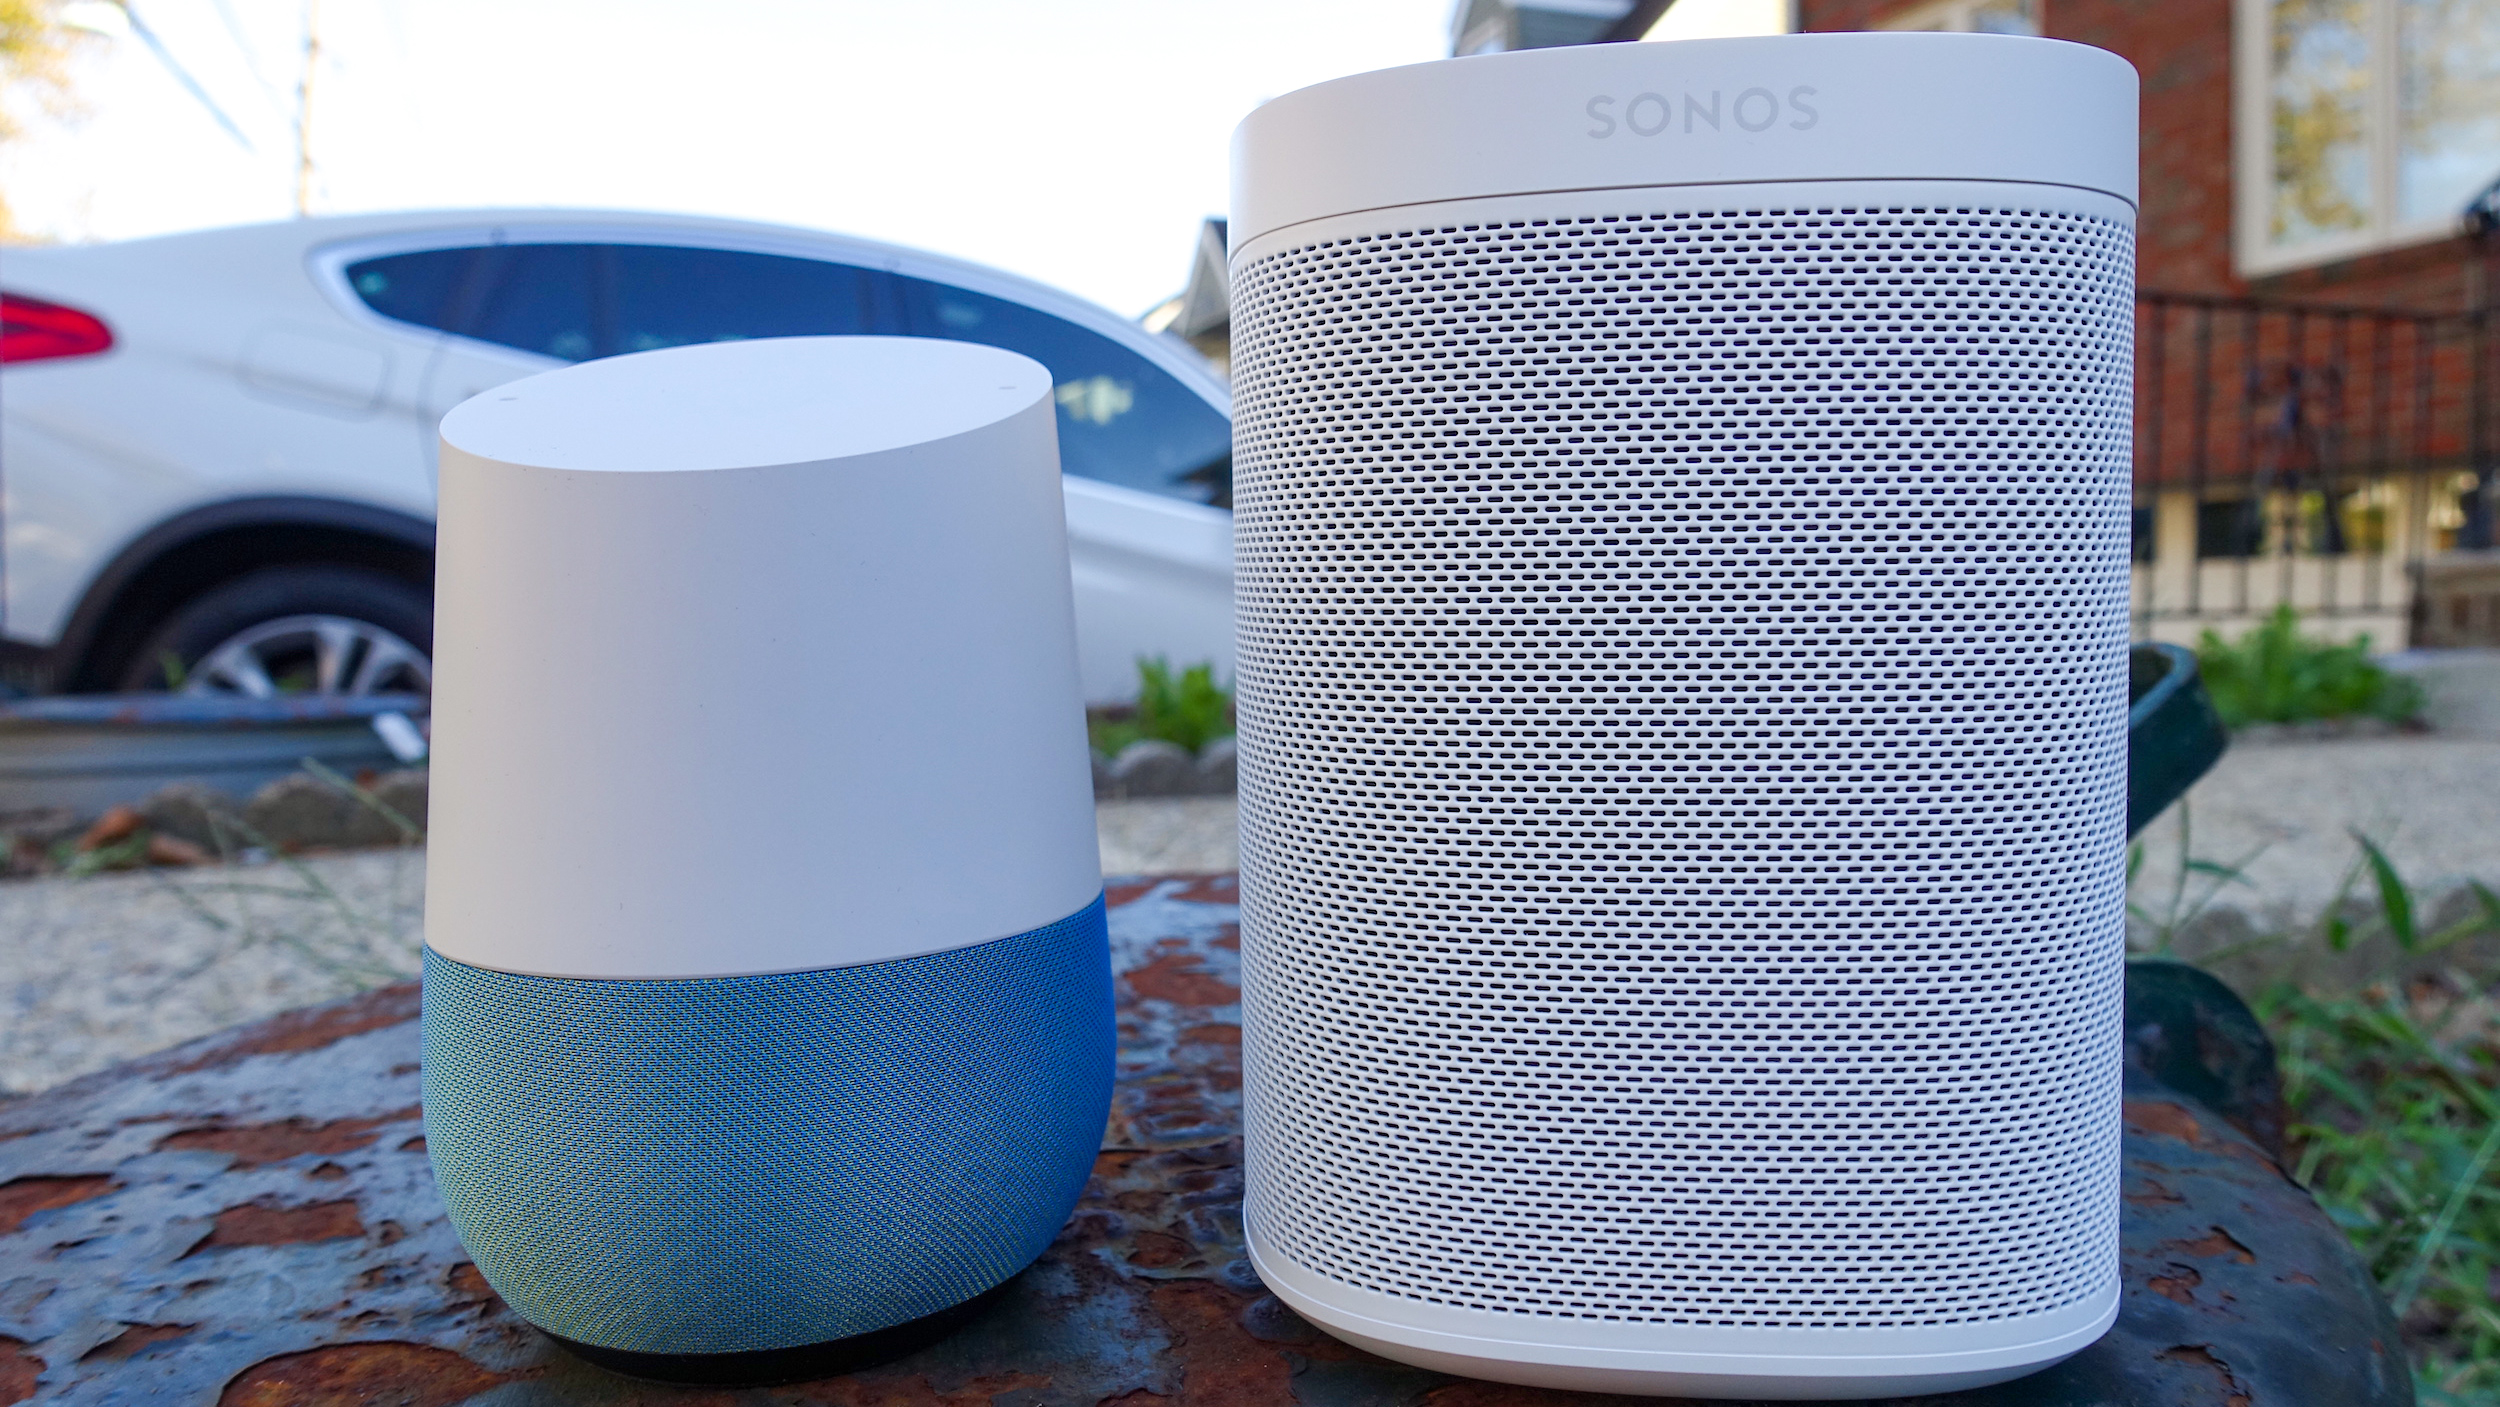 early patent victory against Google smart speakers | Ars Technica